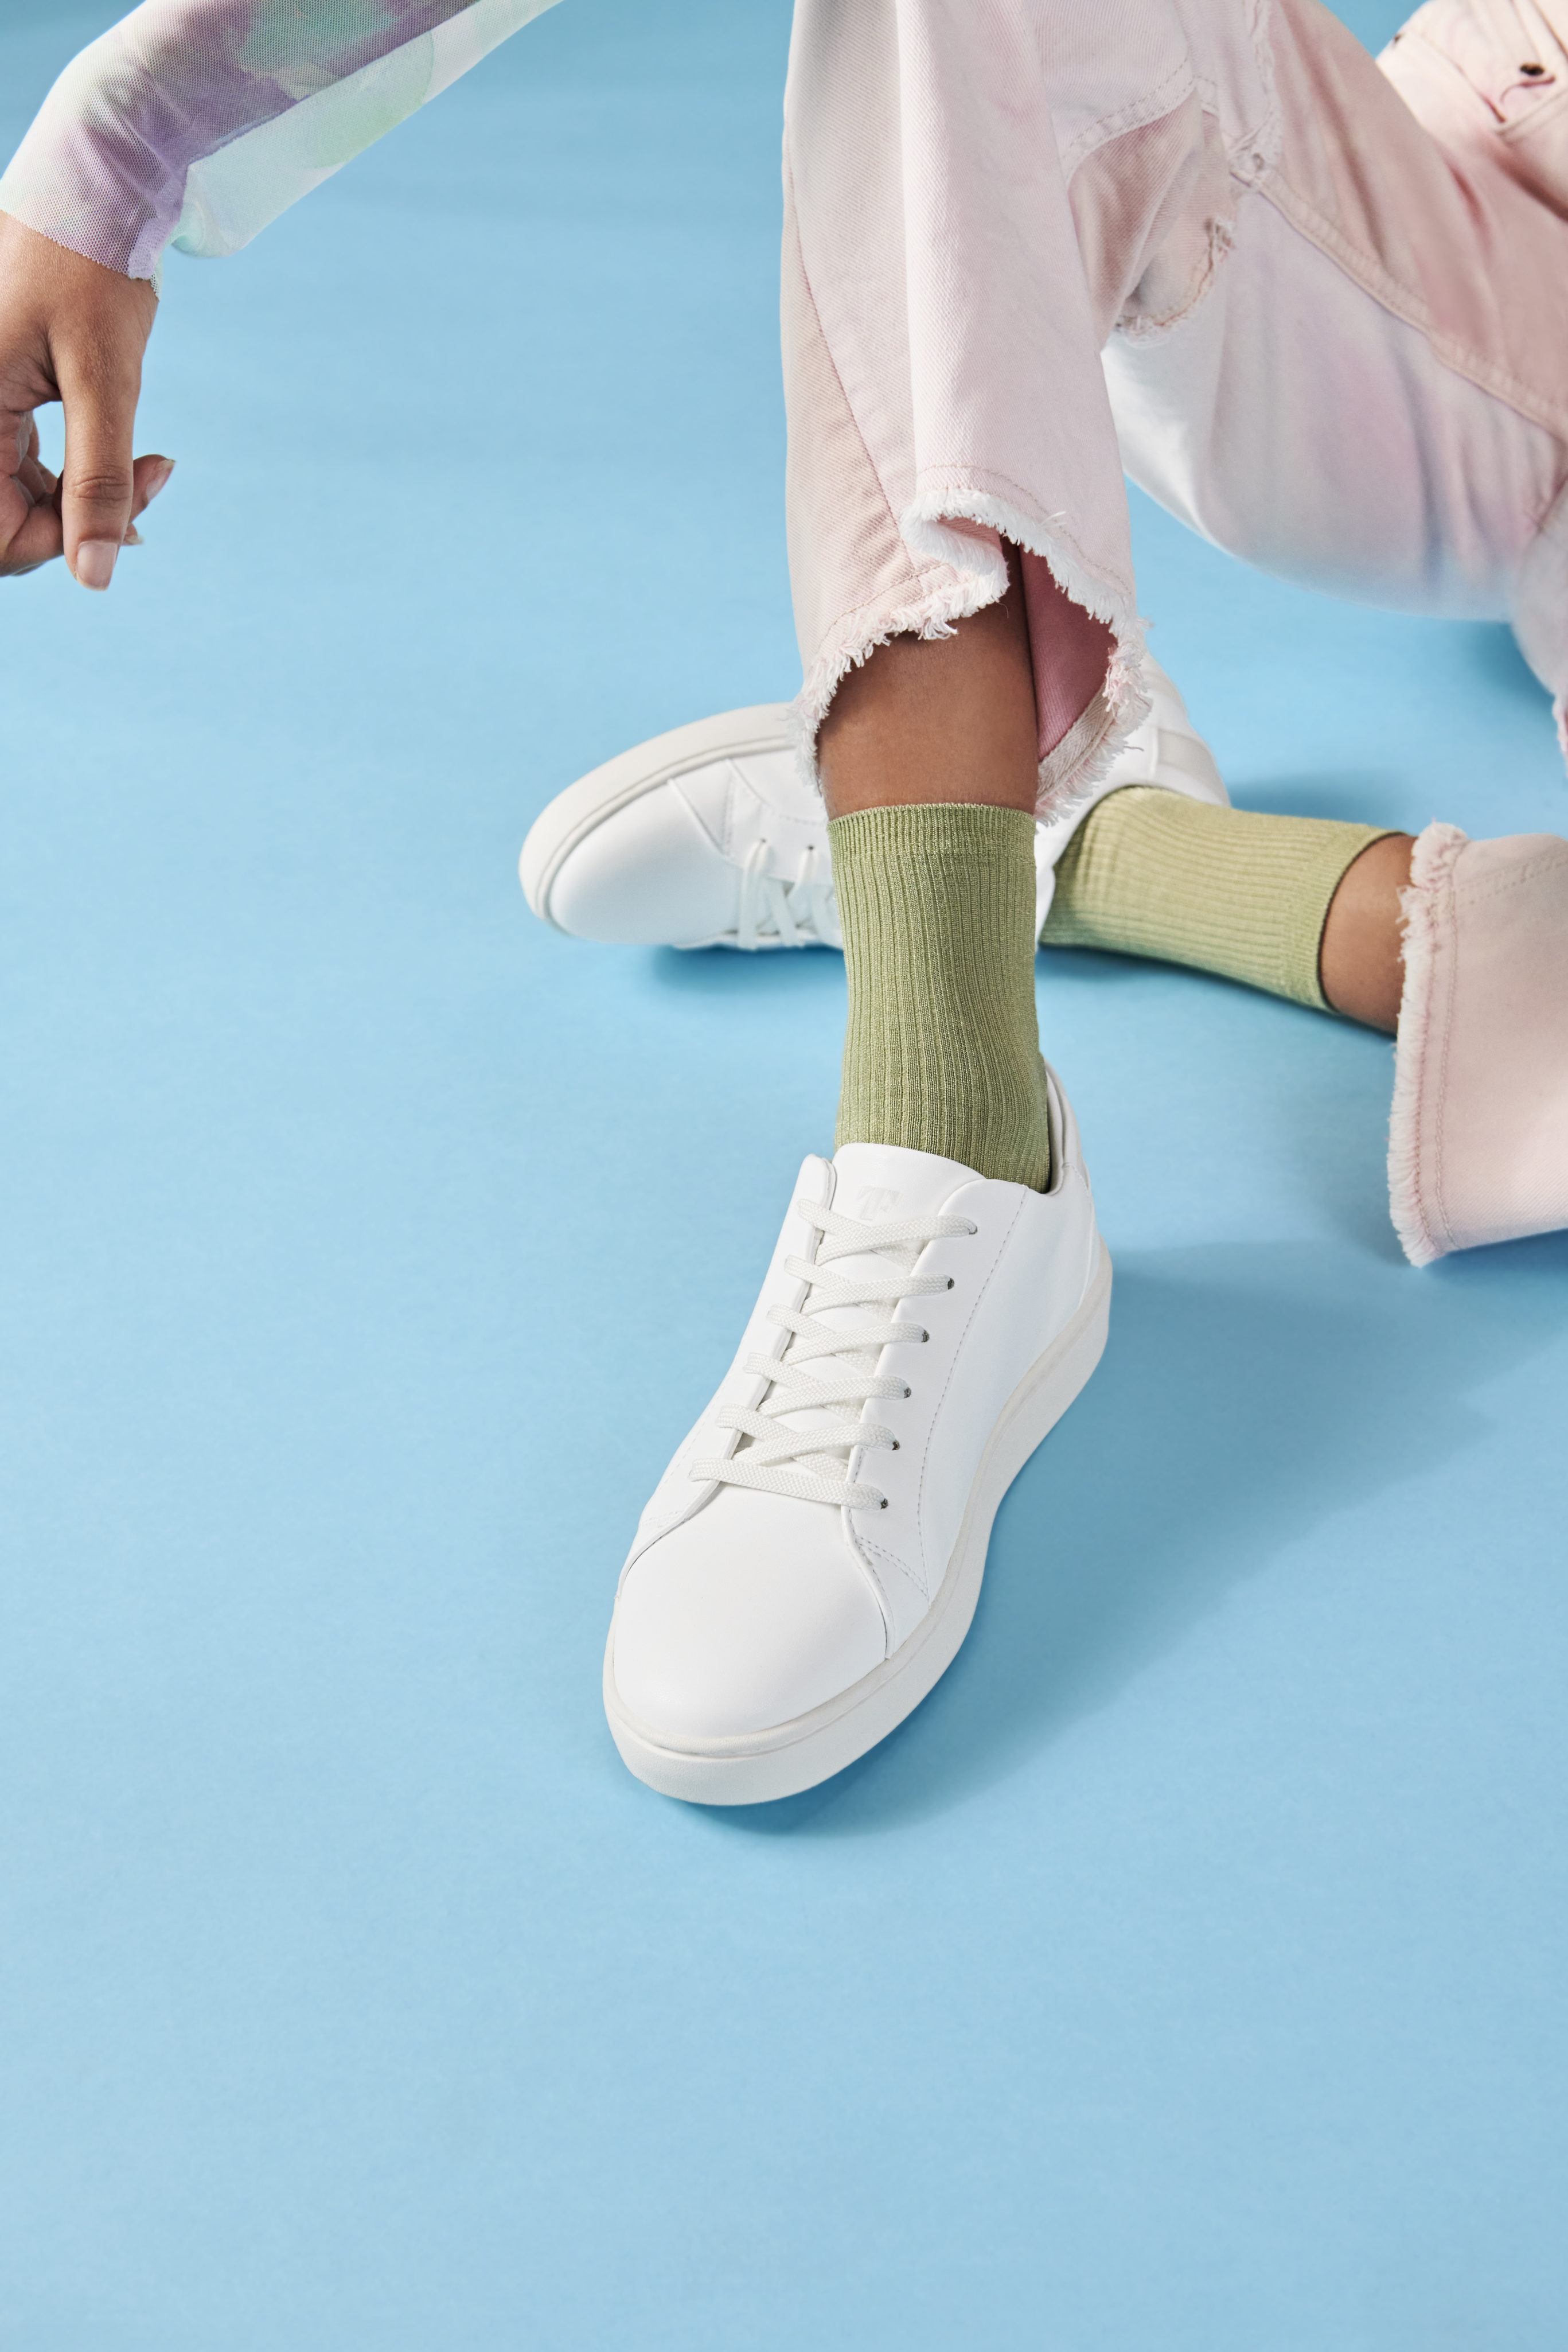 Thousand Fell: The Vegan Recyclable Sneaker Is Available In Canada ...